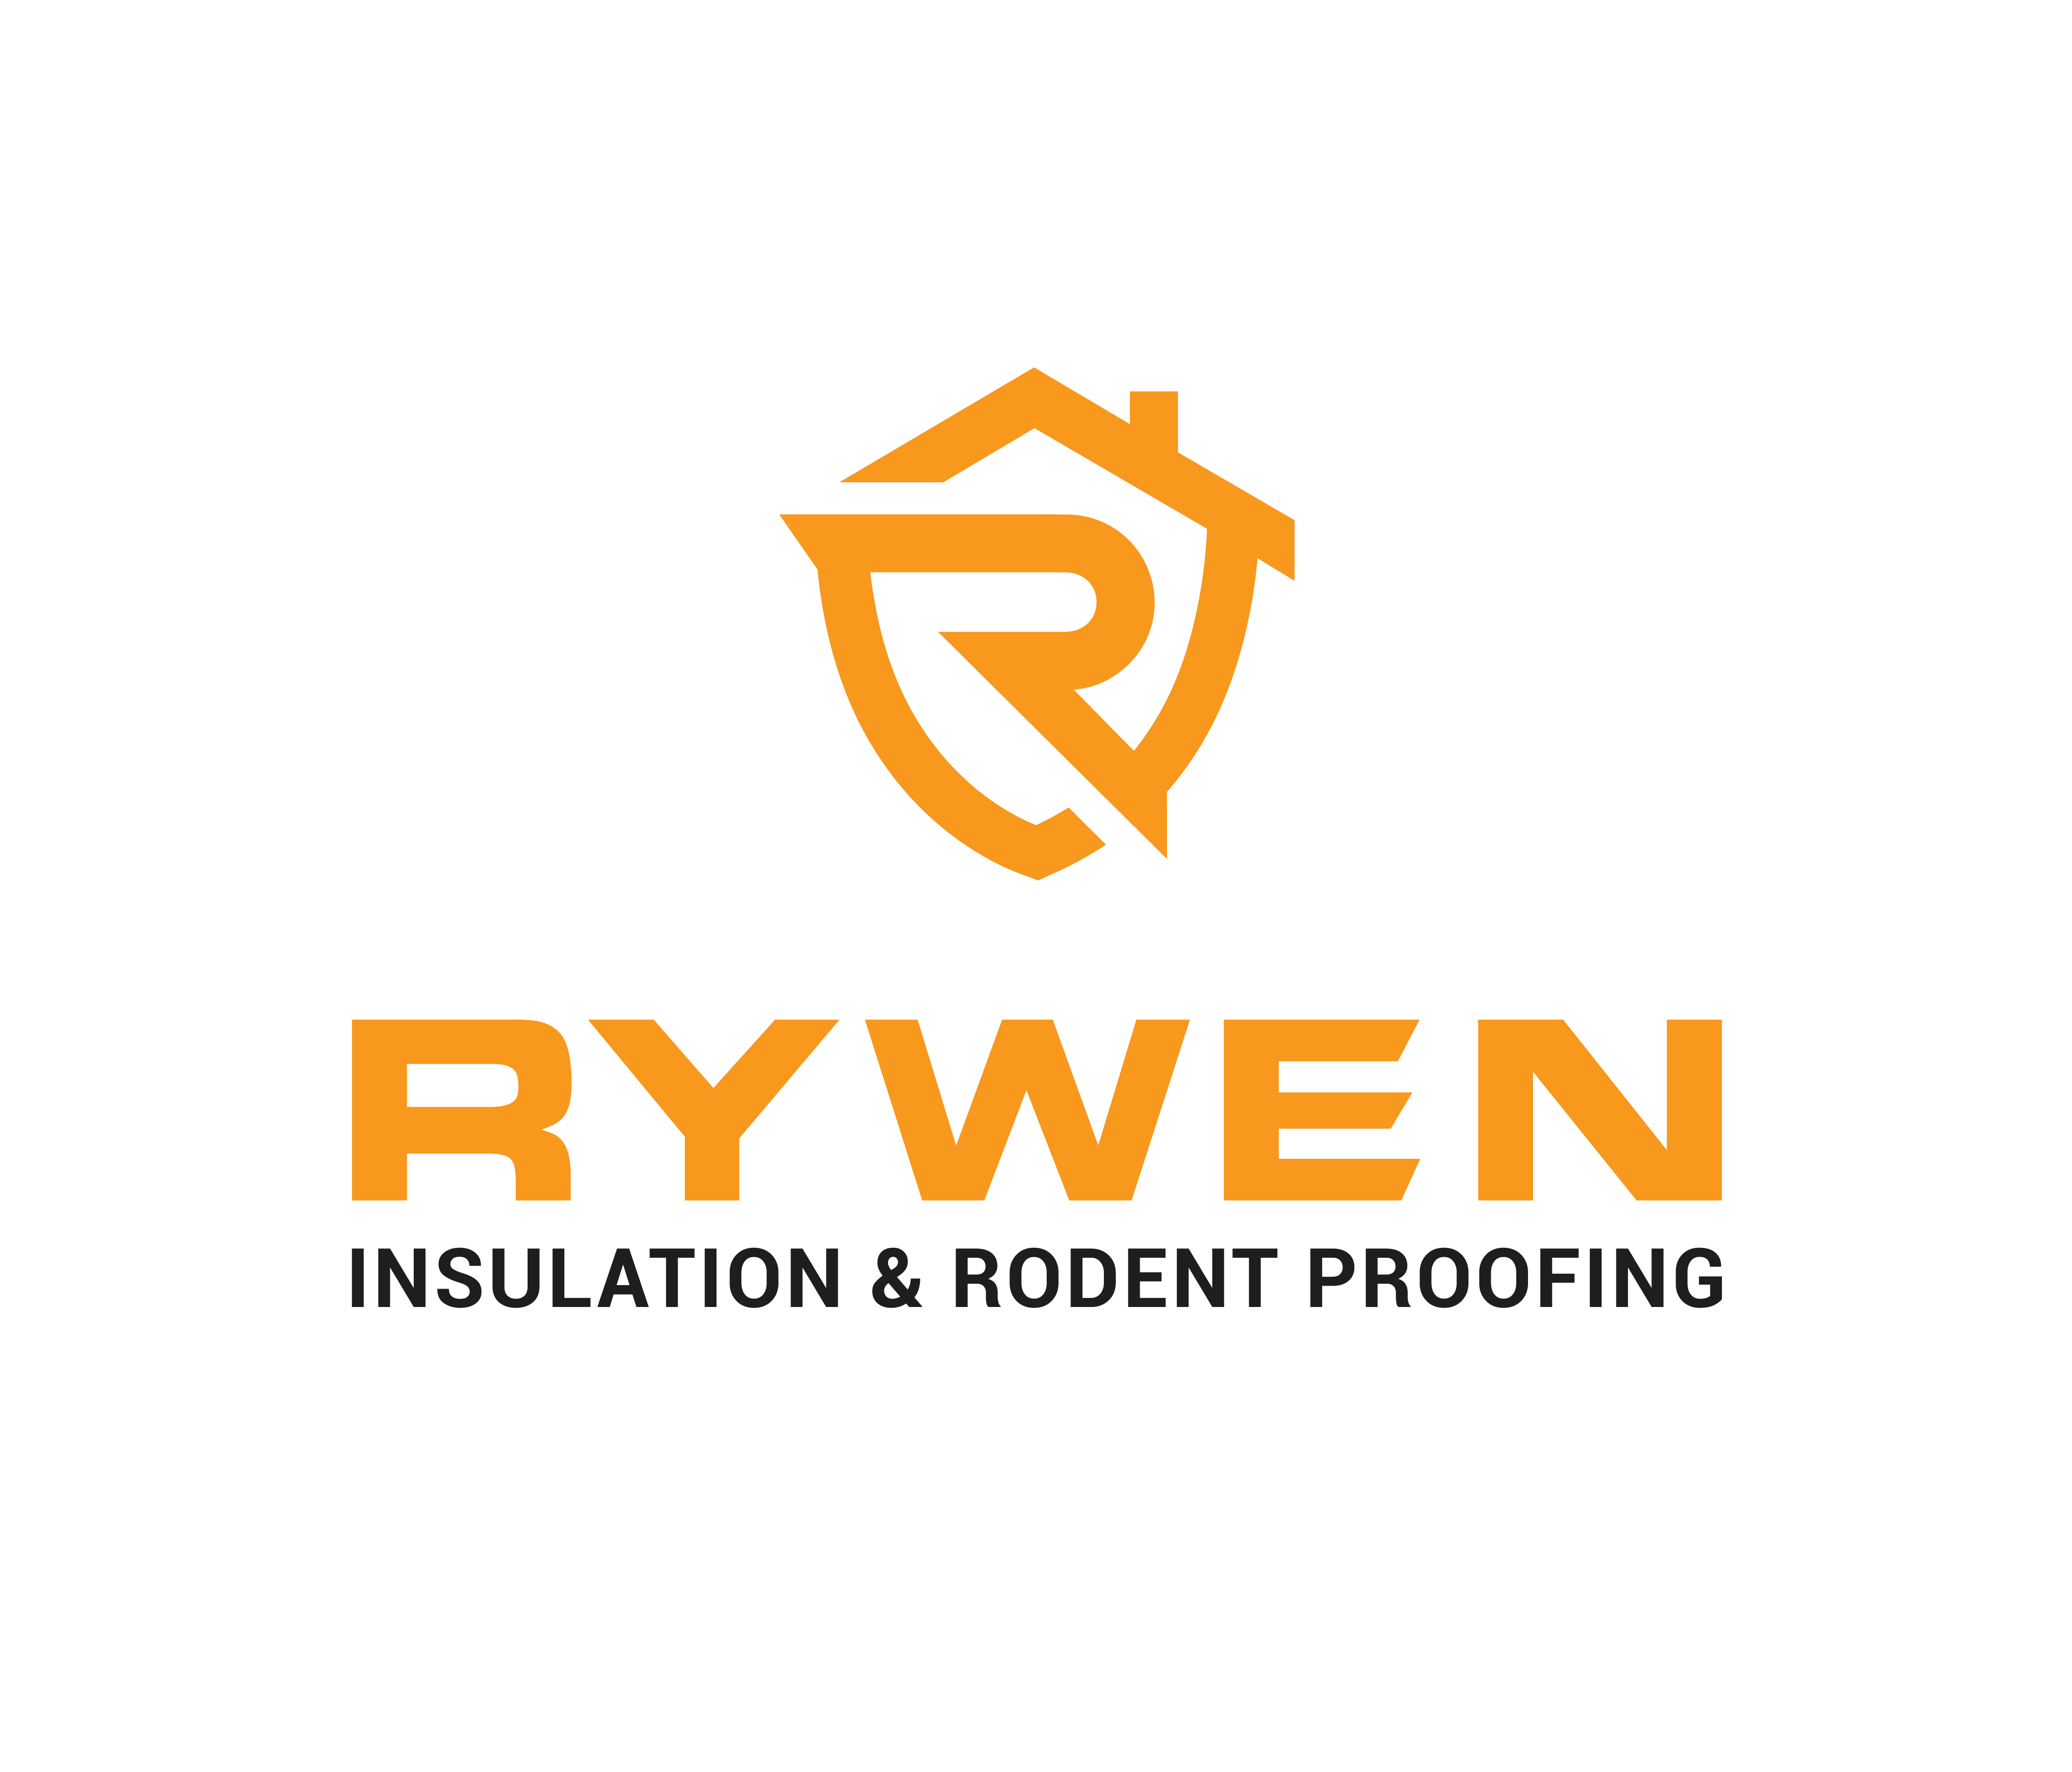 Rywen Insulation & Rodent Proofing - Unlicensed Contractor Logo